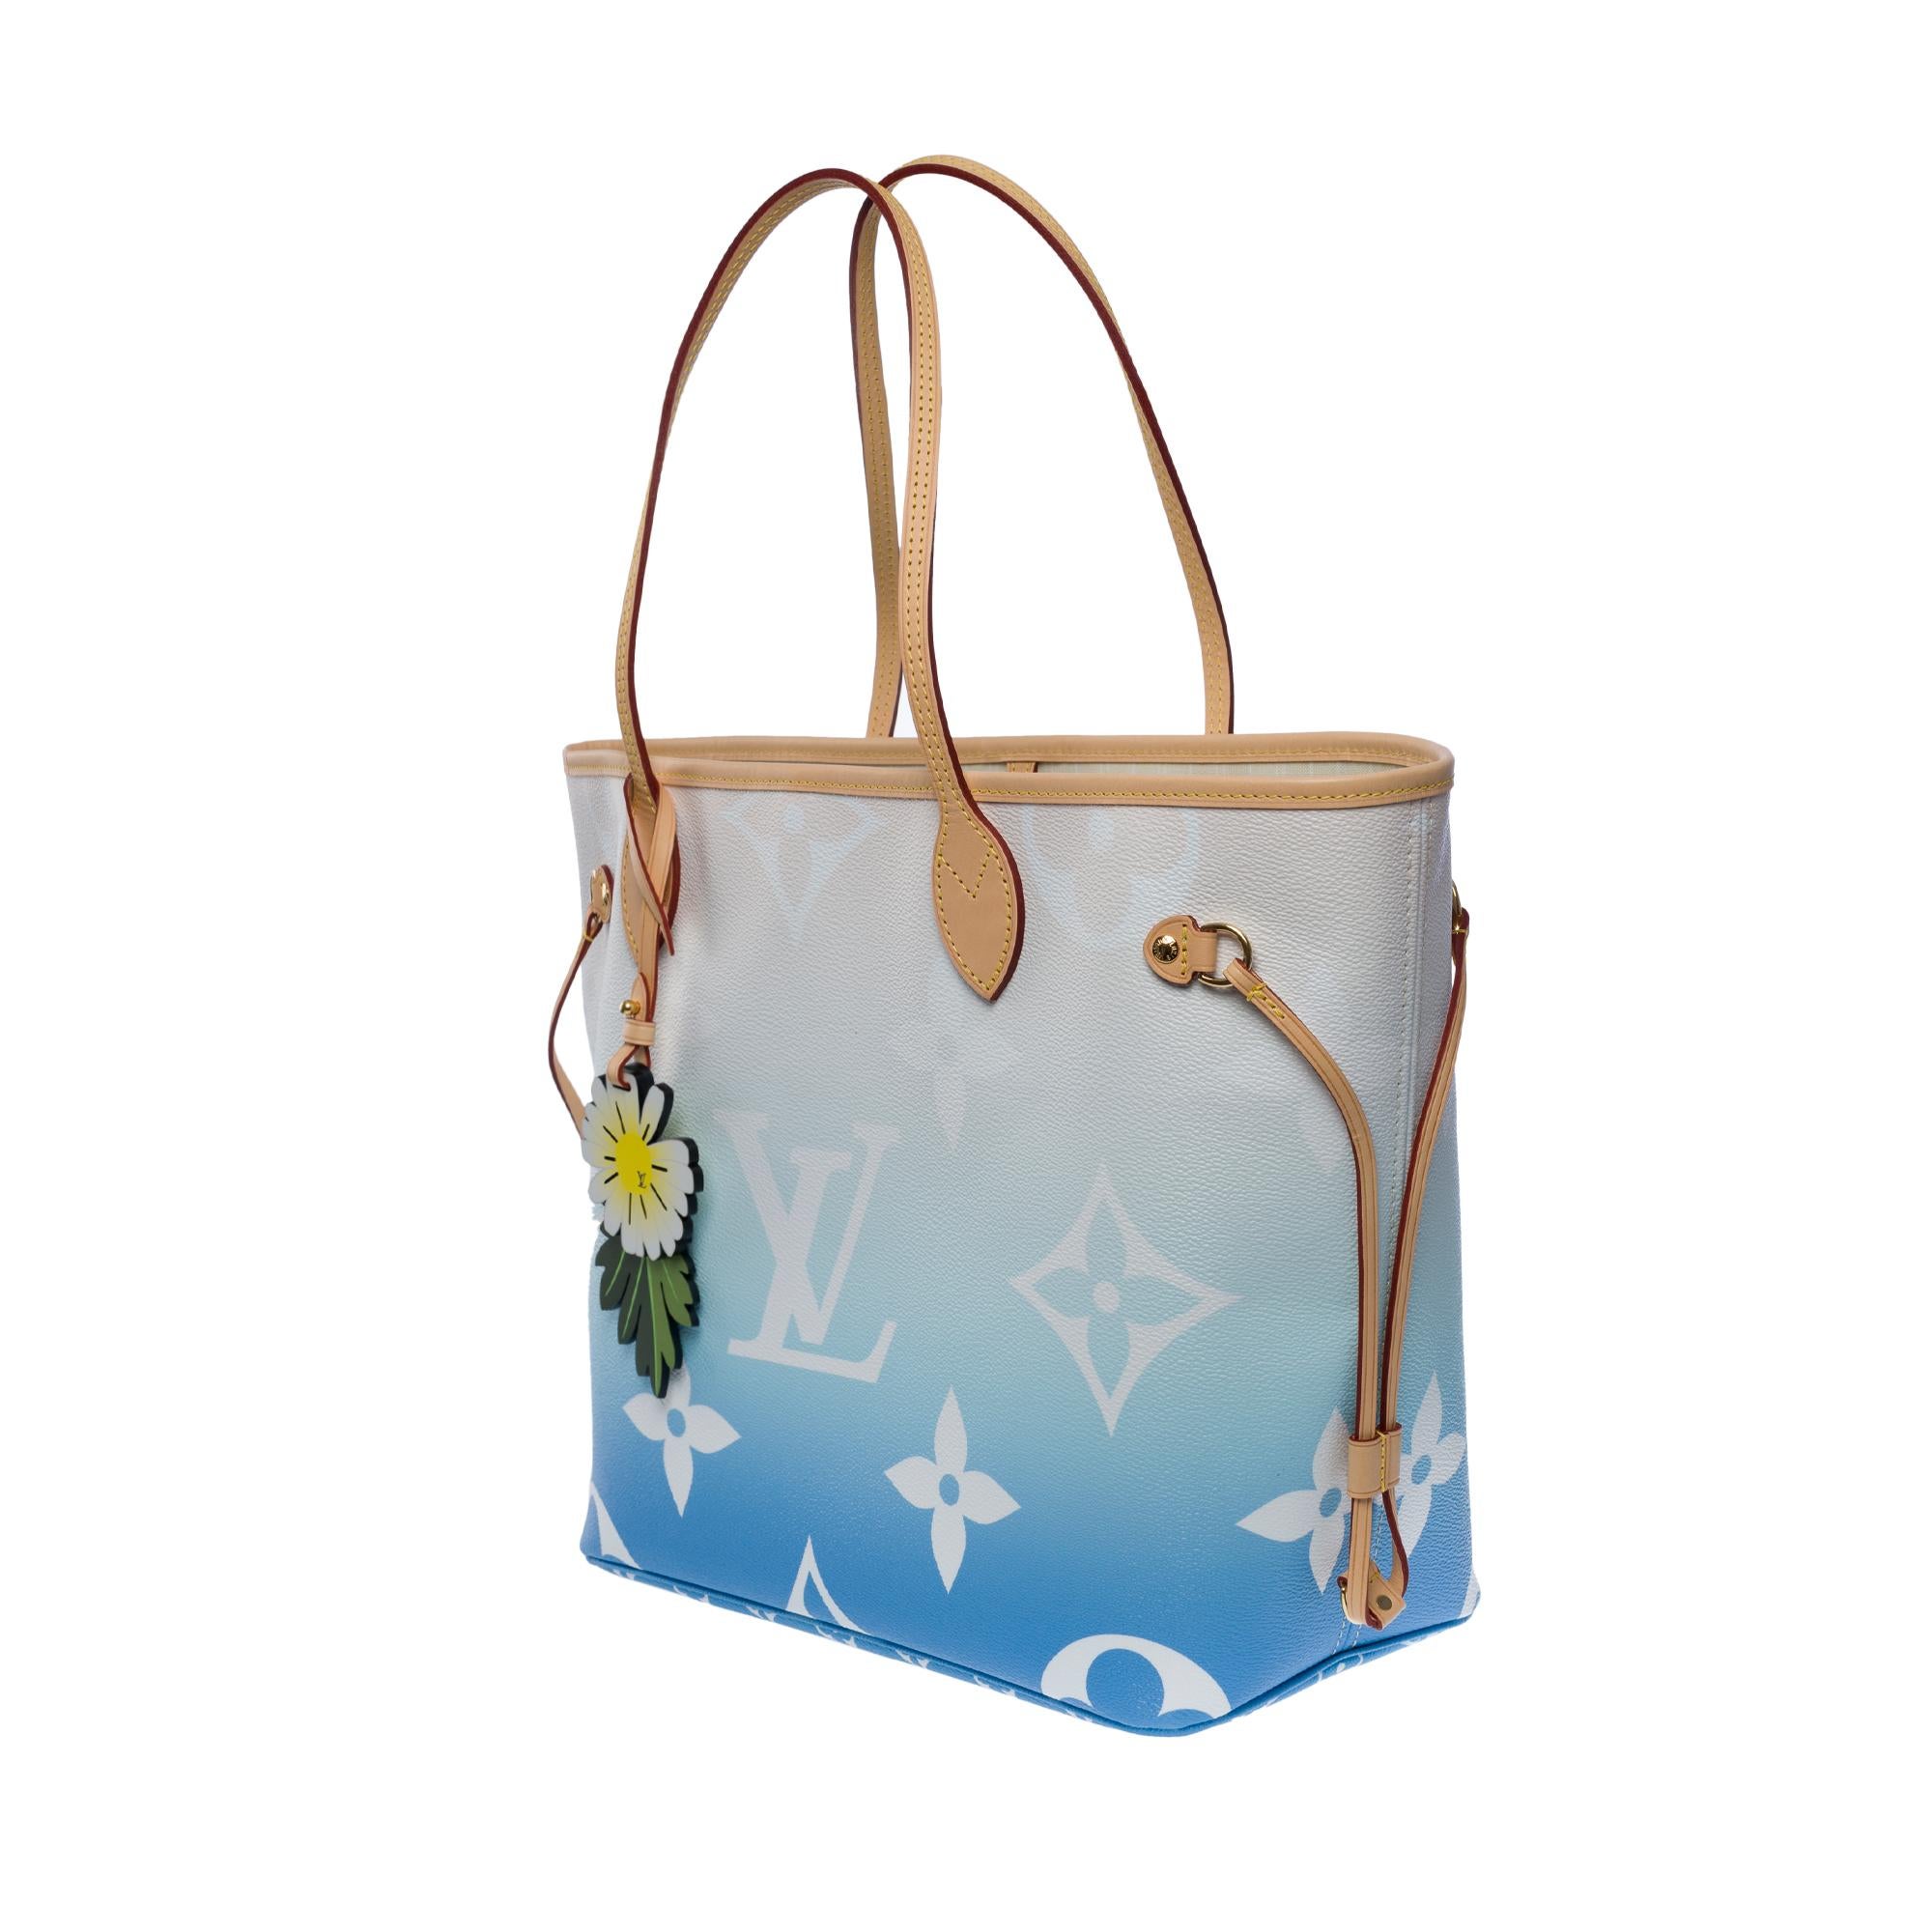 Women's New Louis Vuitton Neverfull MM By the Pool Tote bag in Blue&White Canvas, GHW